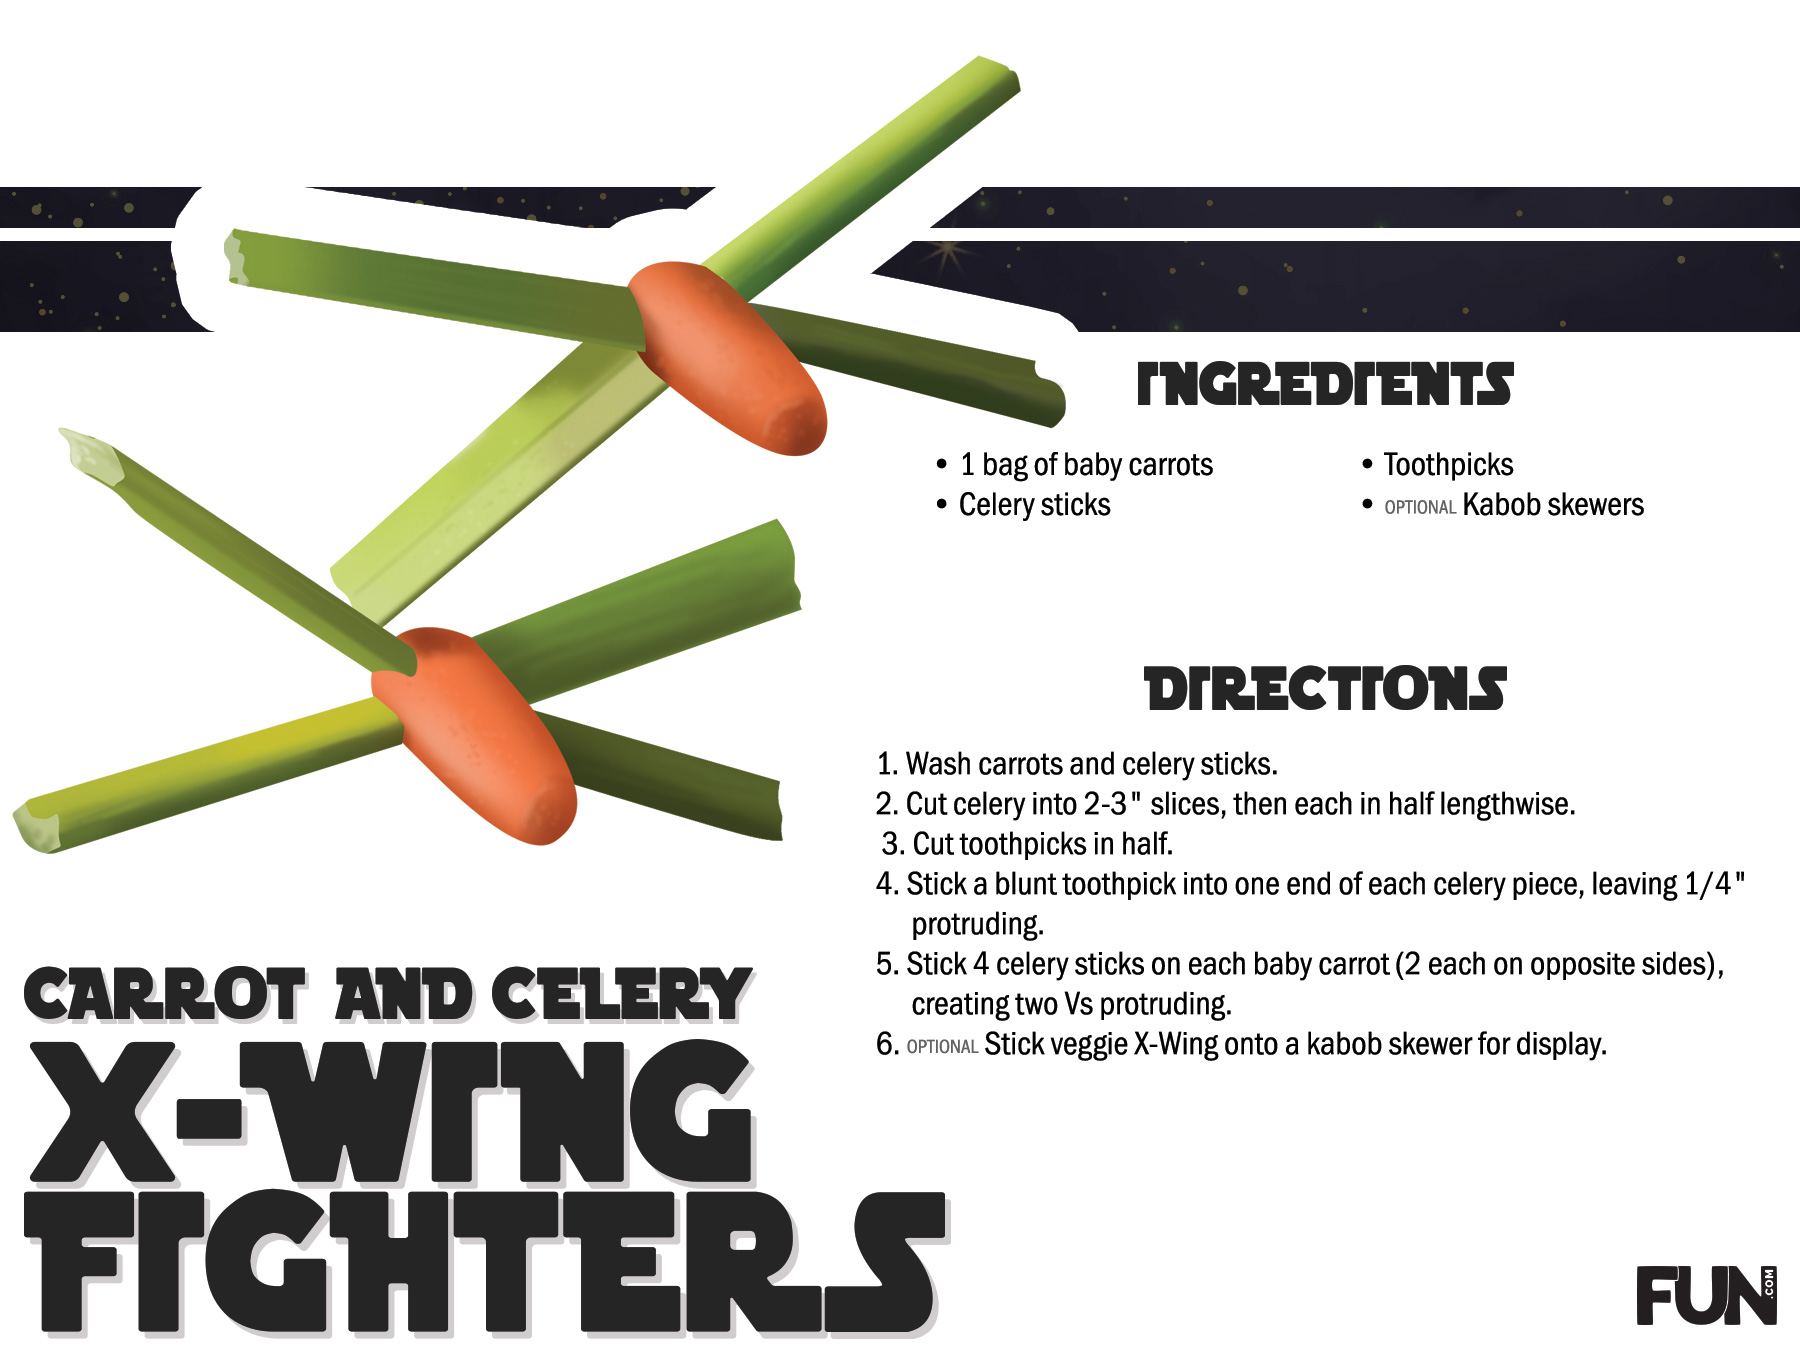 Carrot and Celery X-Wing Fighters Recipe